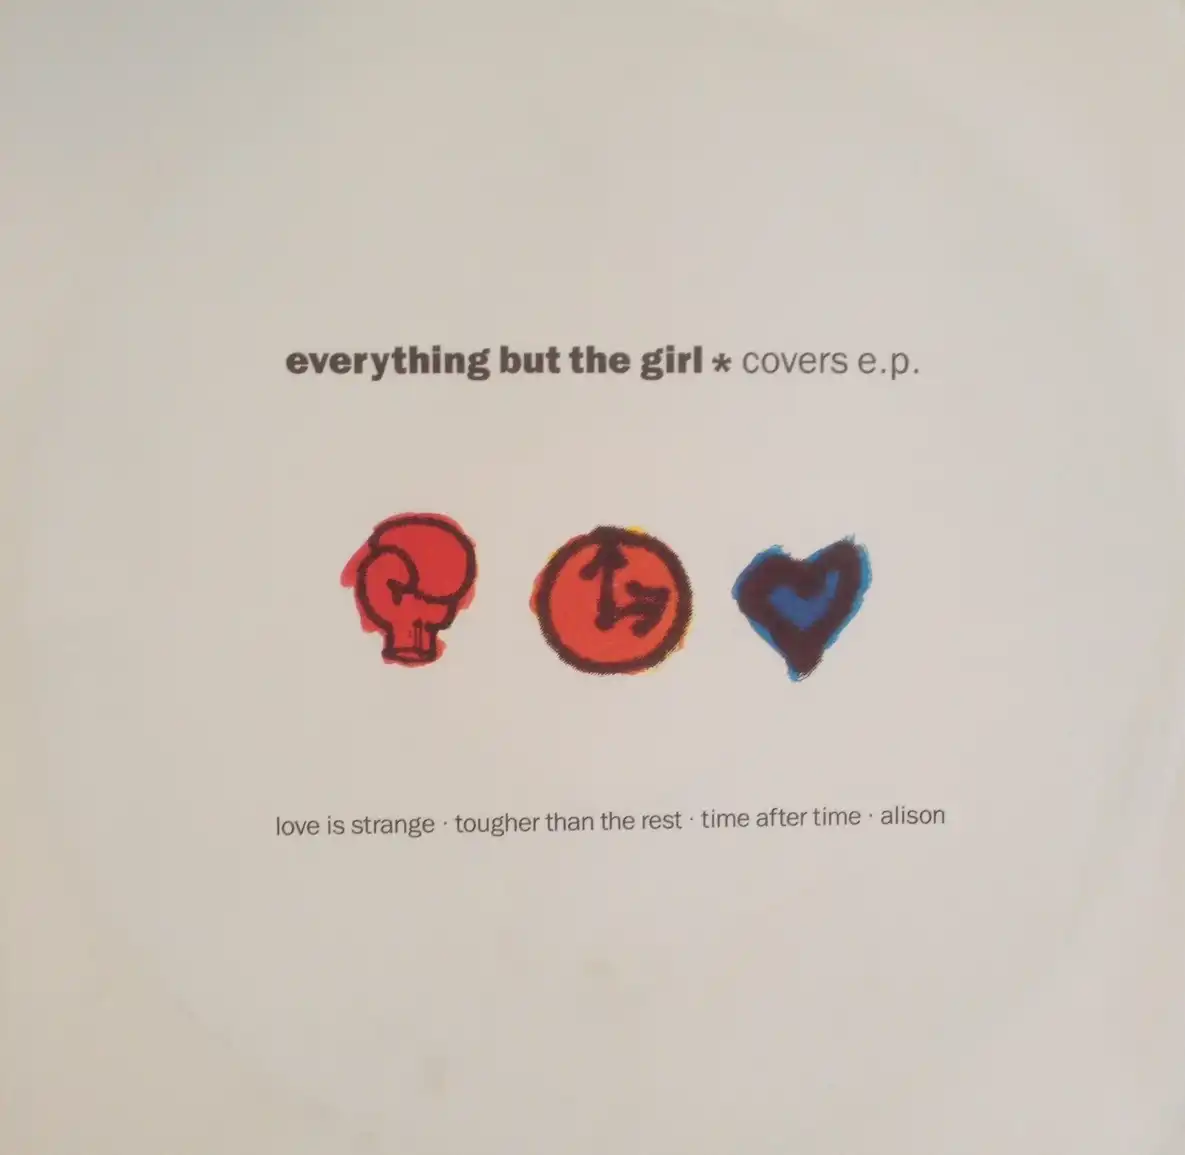 EVERYTHING BUT THE GIRL / COVERS E.P.